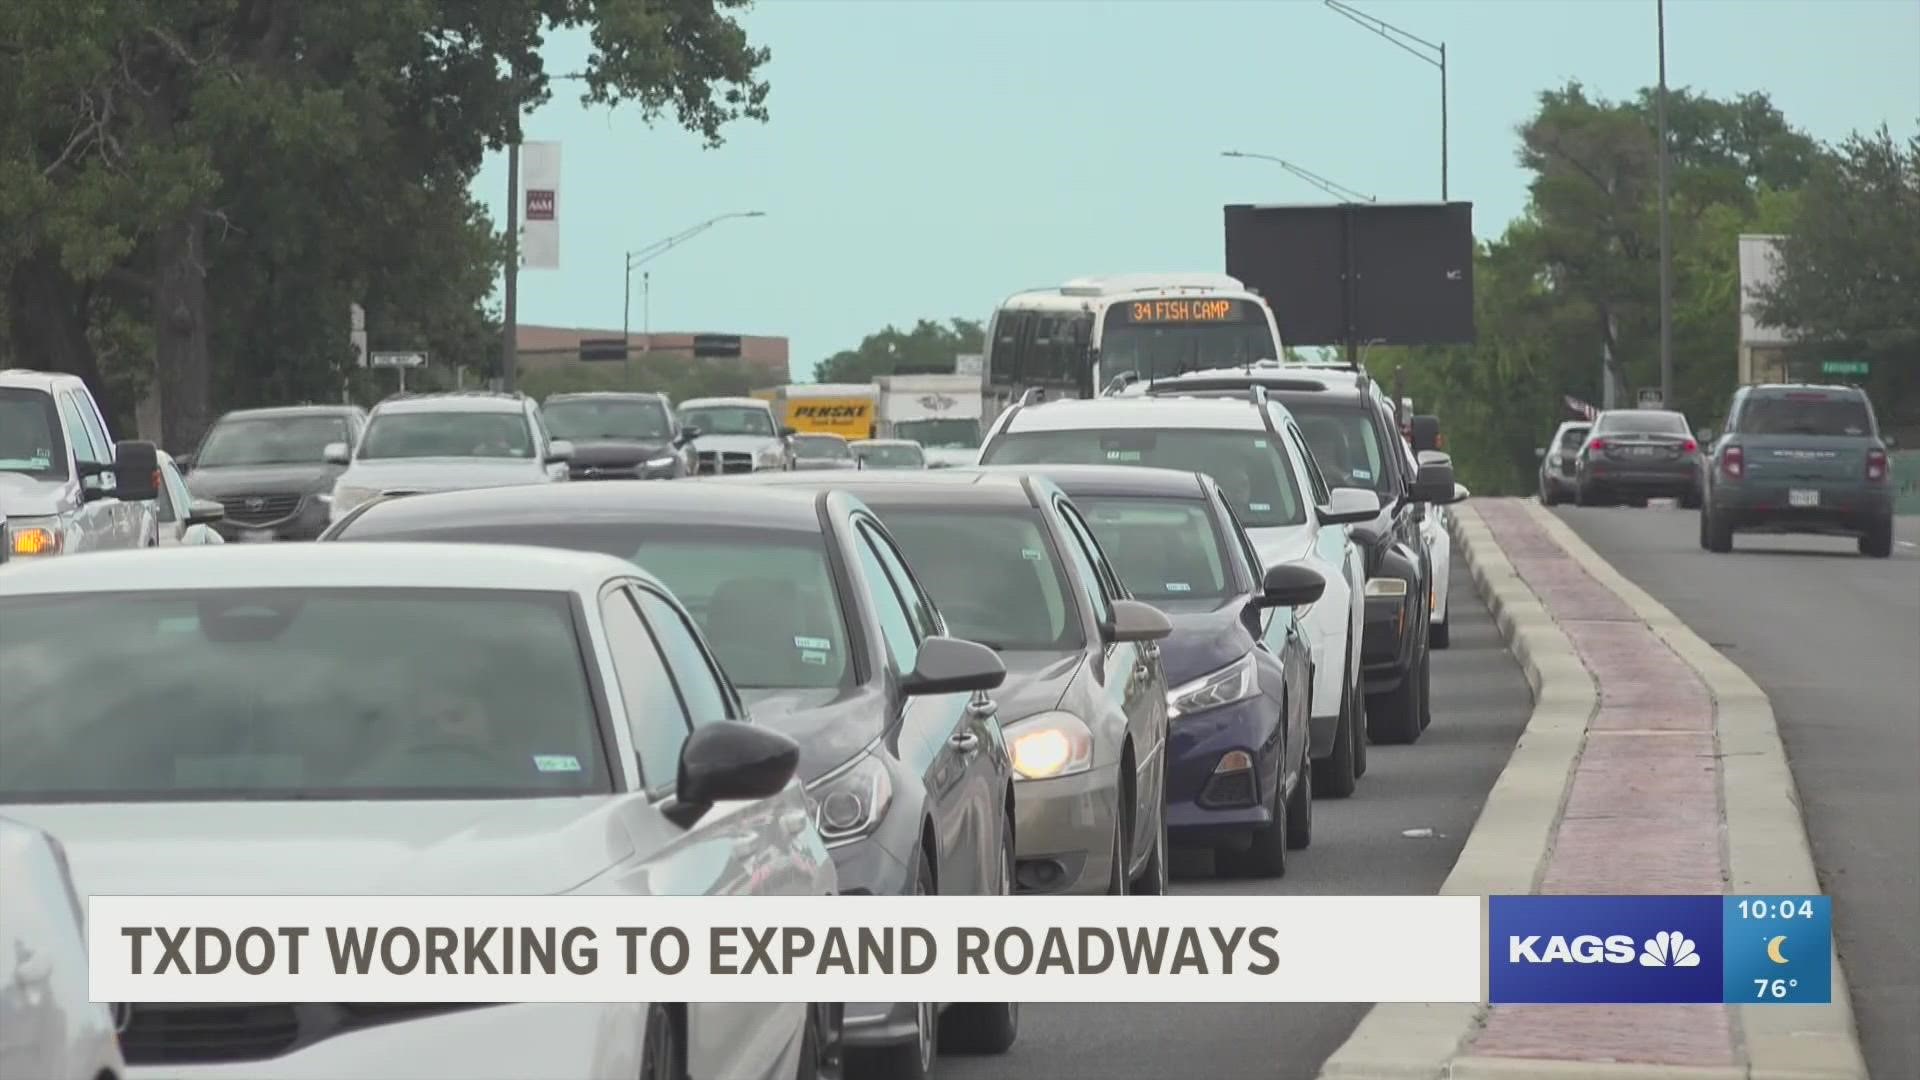 Governor Abbott announced TxDOT's 10-year statewide roadway plan to improve highways for the projected increase of Texans living in the Lone Star state in the future